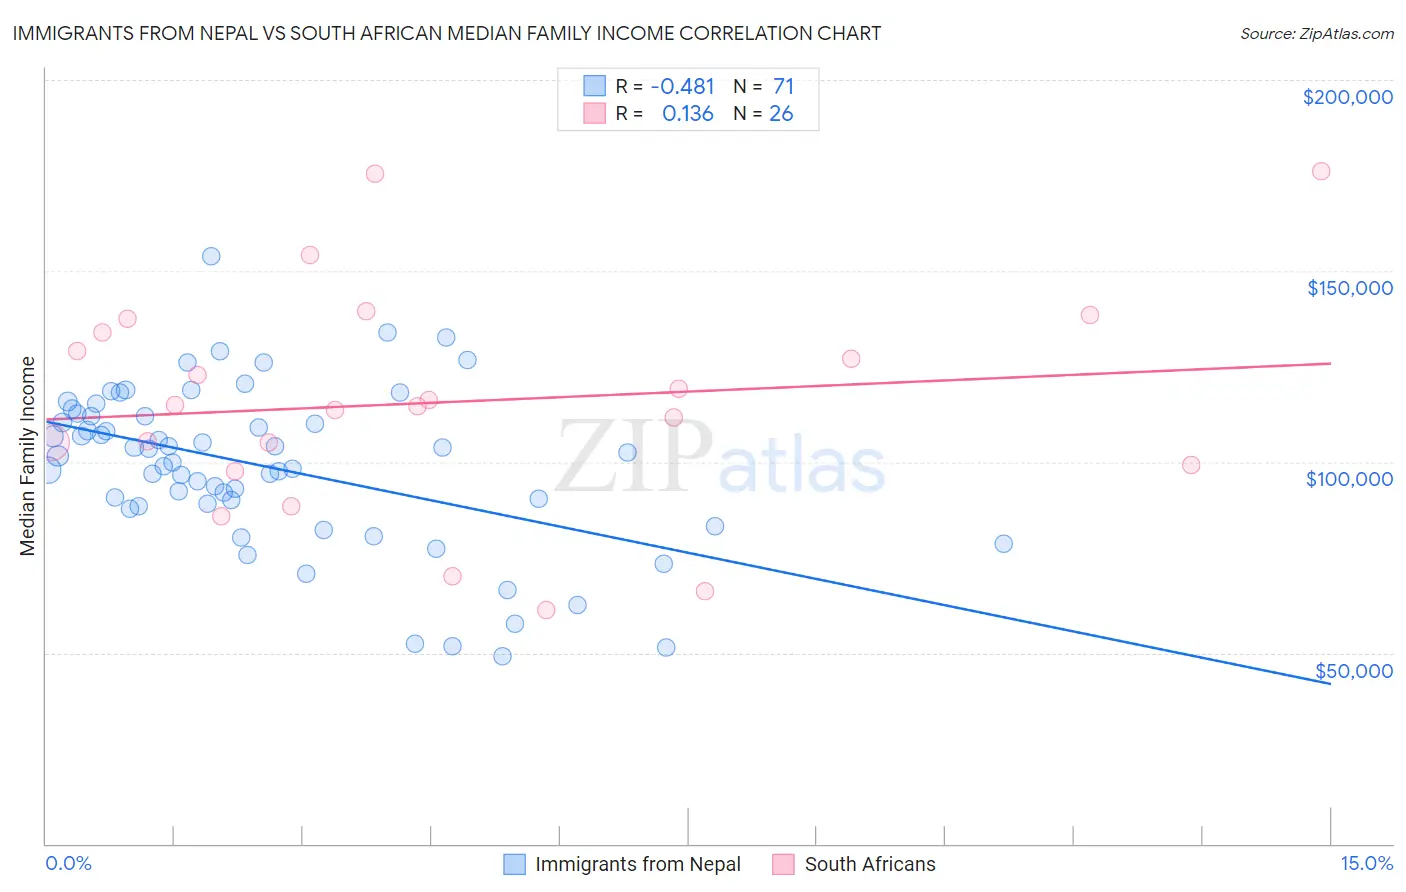 Immigrants from Nepal vs South African Median Family Income